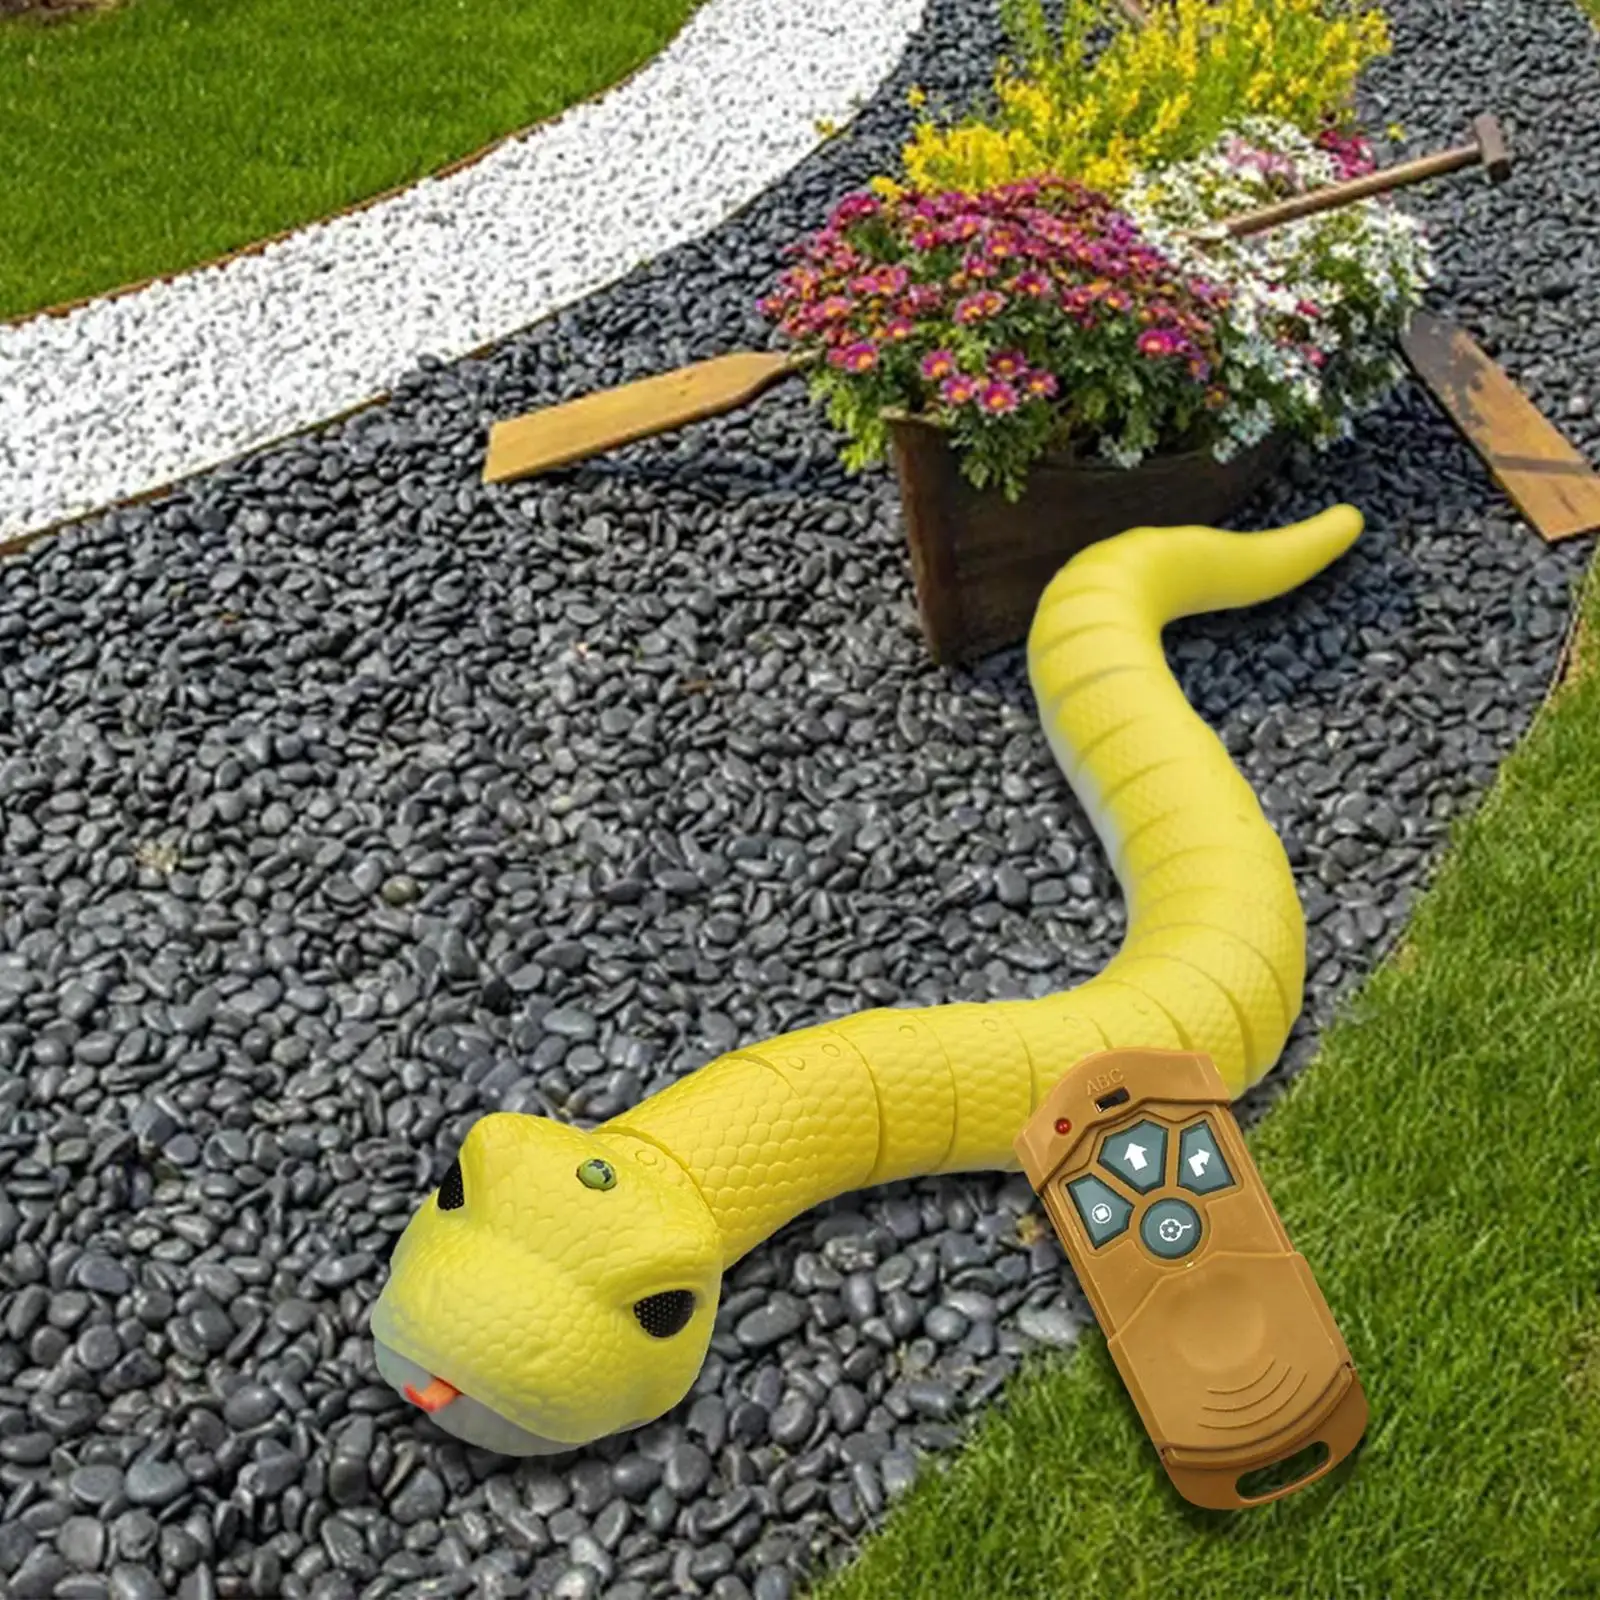 Remote Control Snake Toy Moves RC Realistic Snake Toy for April Fools` Day Practical Jokes Stage Props Tricks Birthday Gift